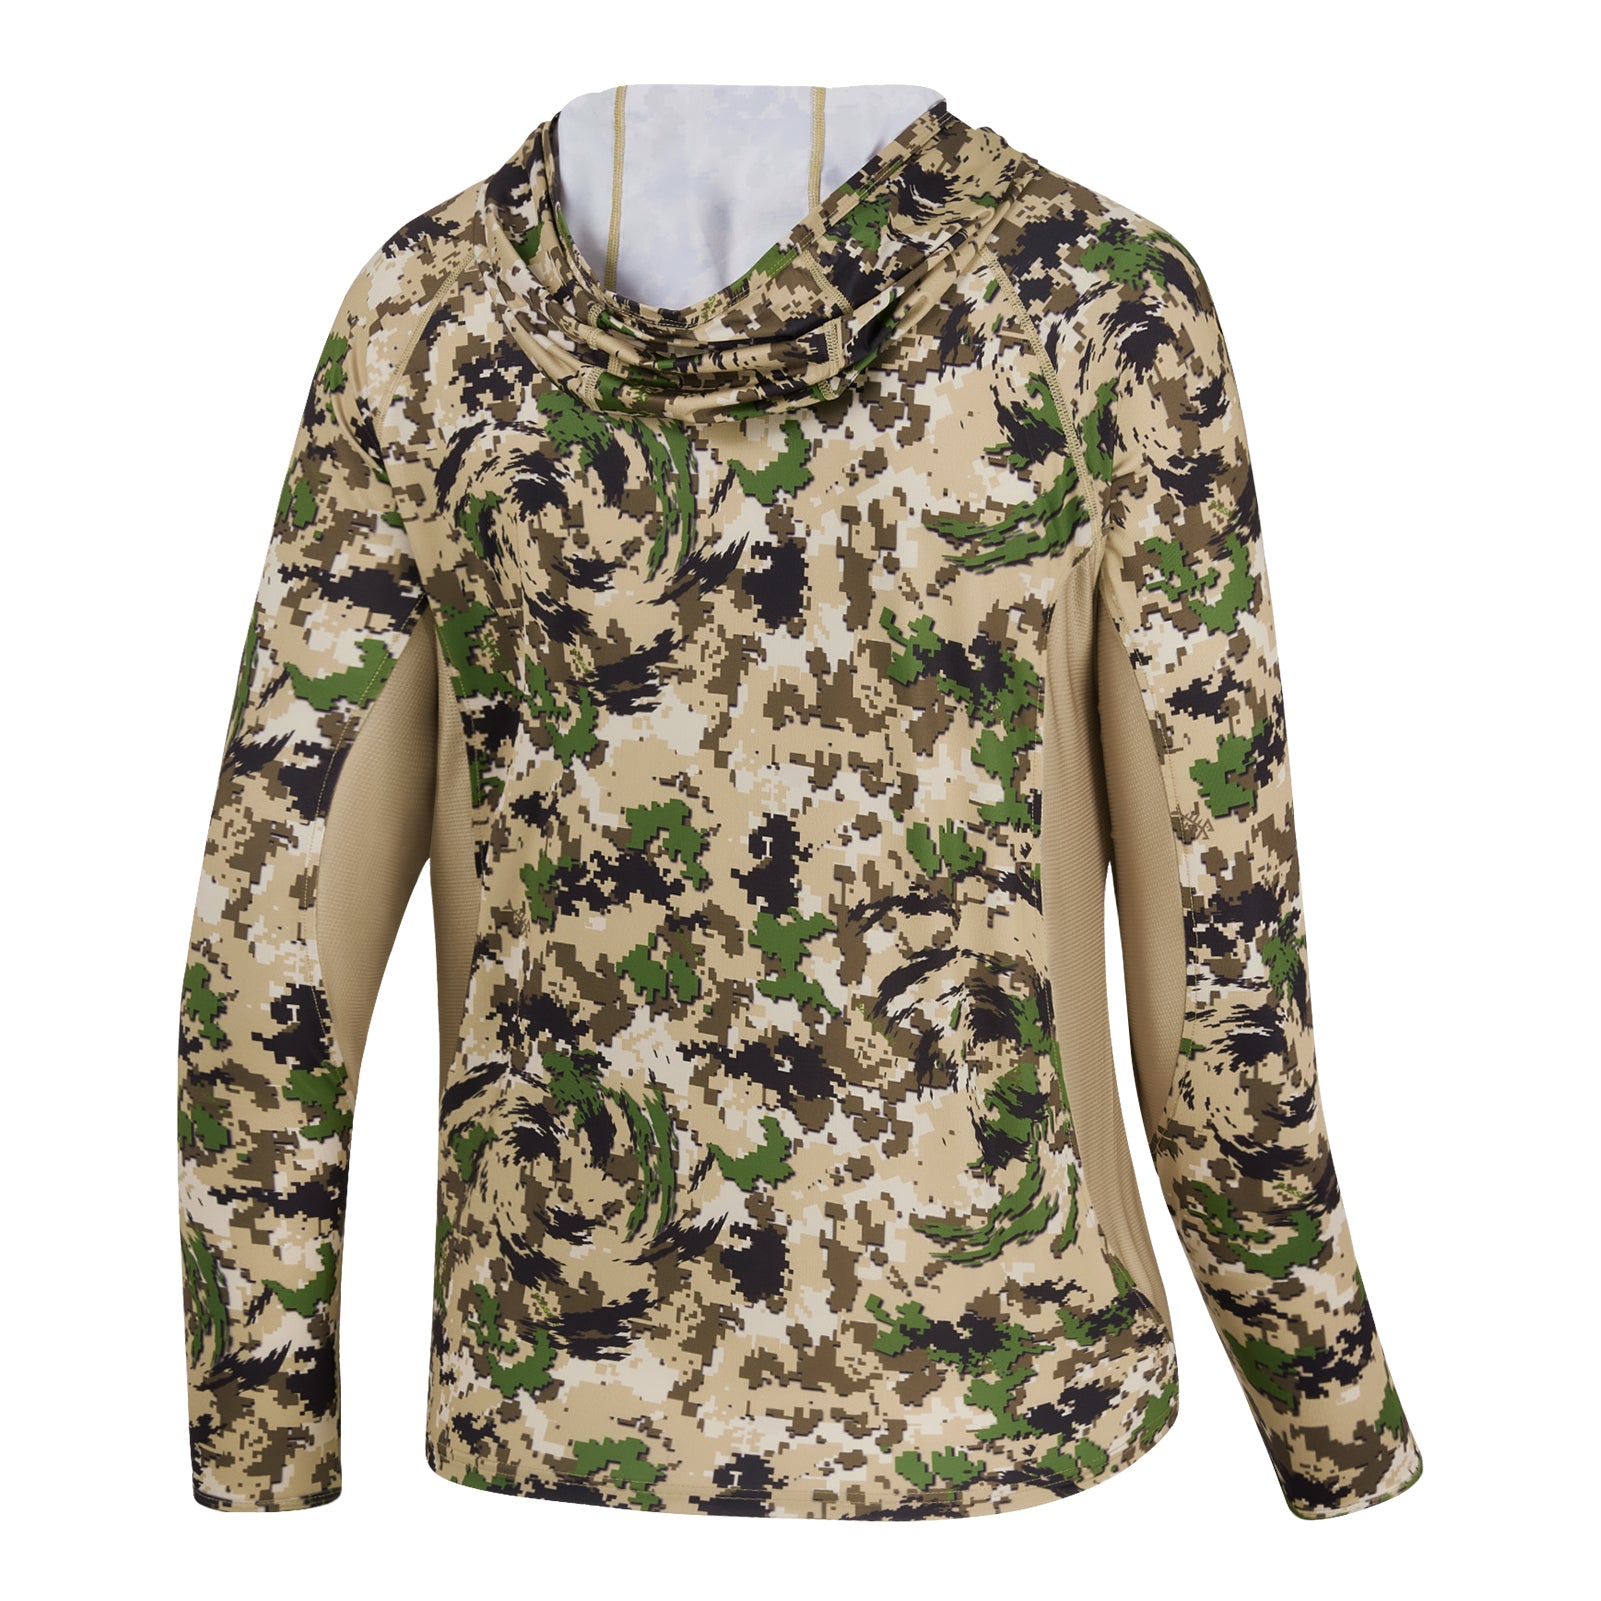 Bassdash Men's Long Sleeve Shirt Hunting Camo Performance For Fishing  Camouflaging Sweatershirt Mossy Wood Reeds Forest SD1